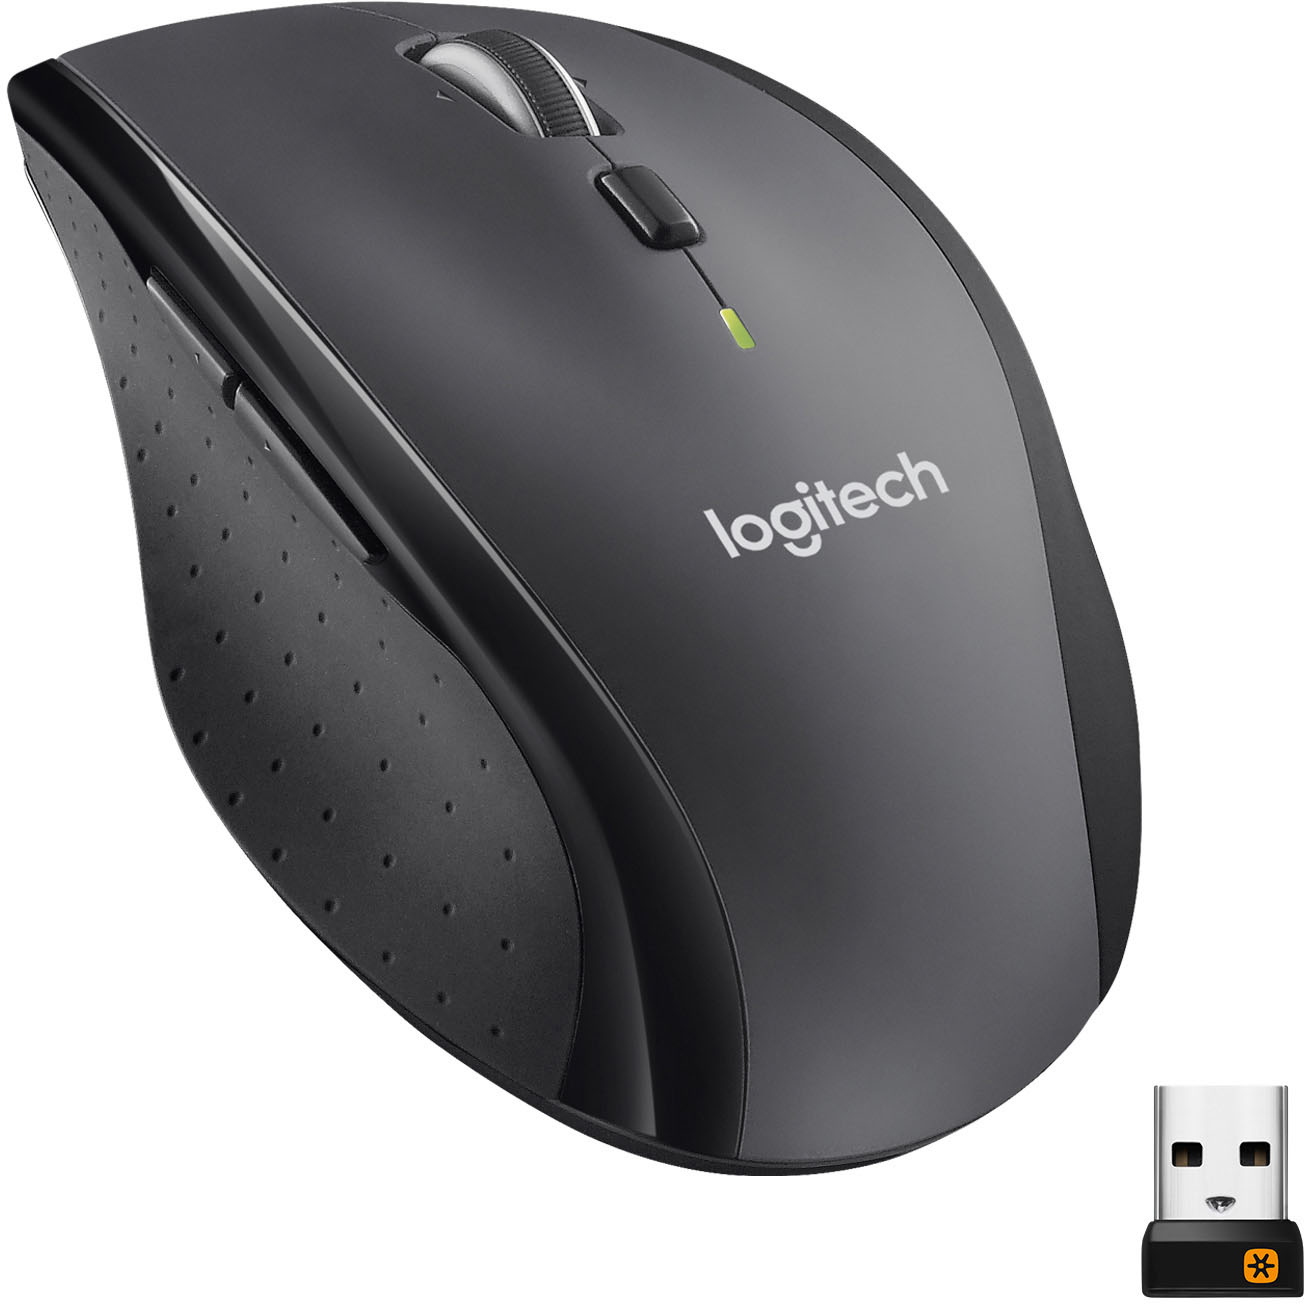 Logitech Unifying Software  What Should You Know? - HowNest